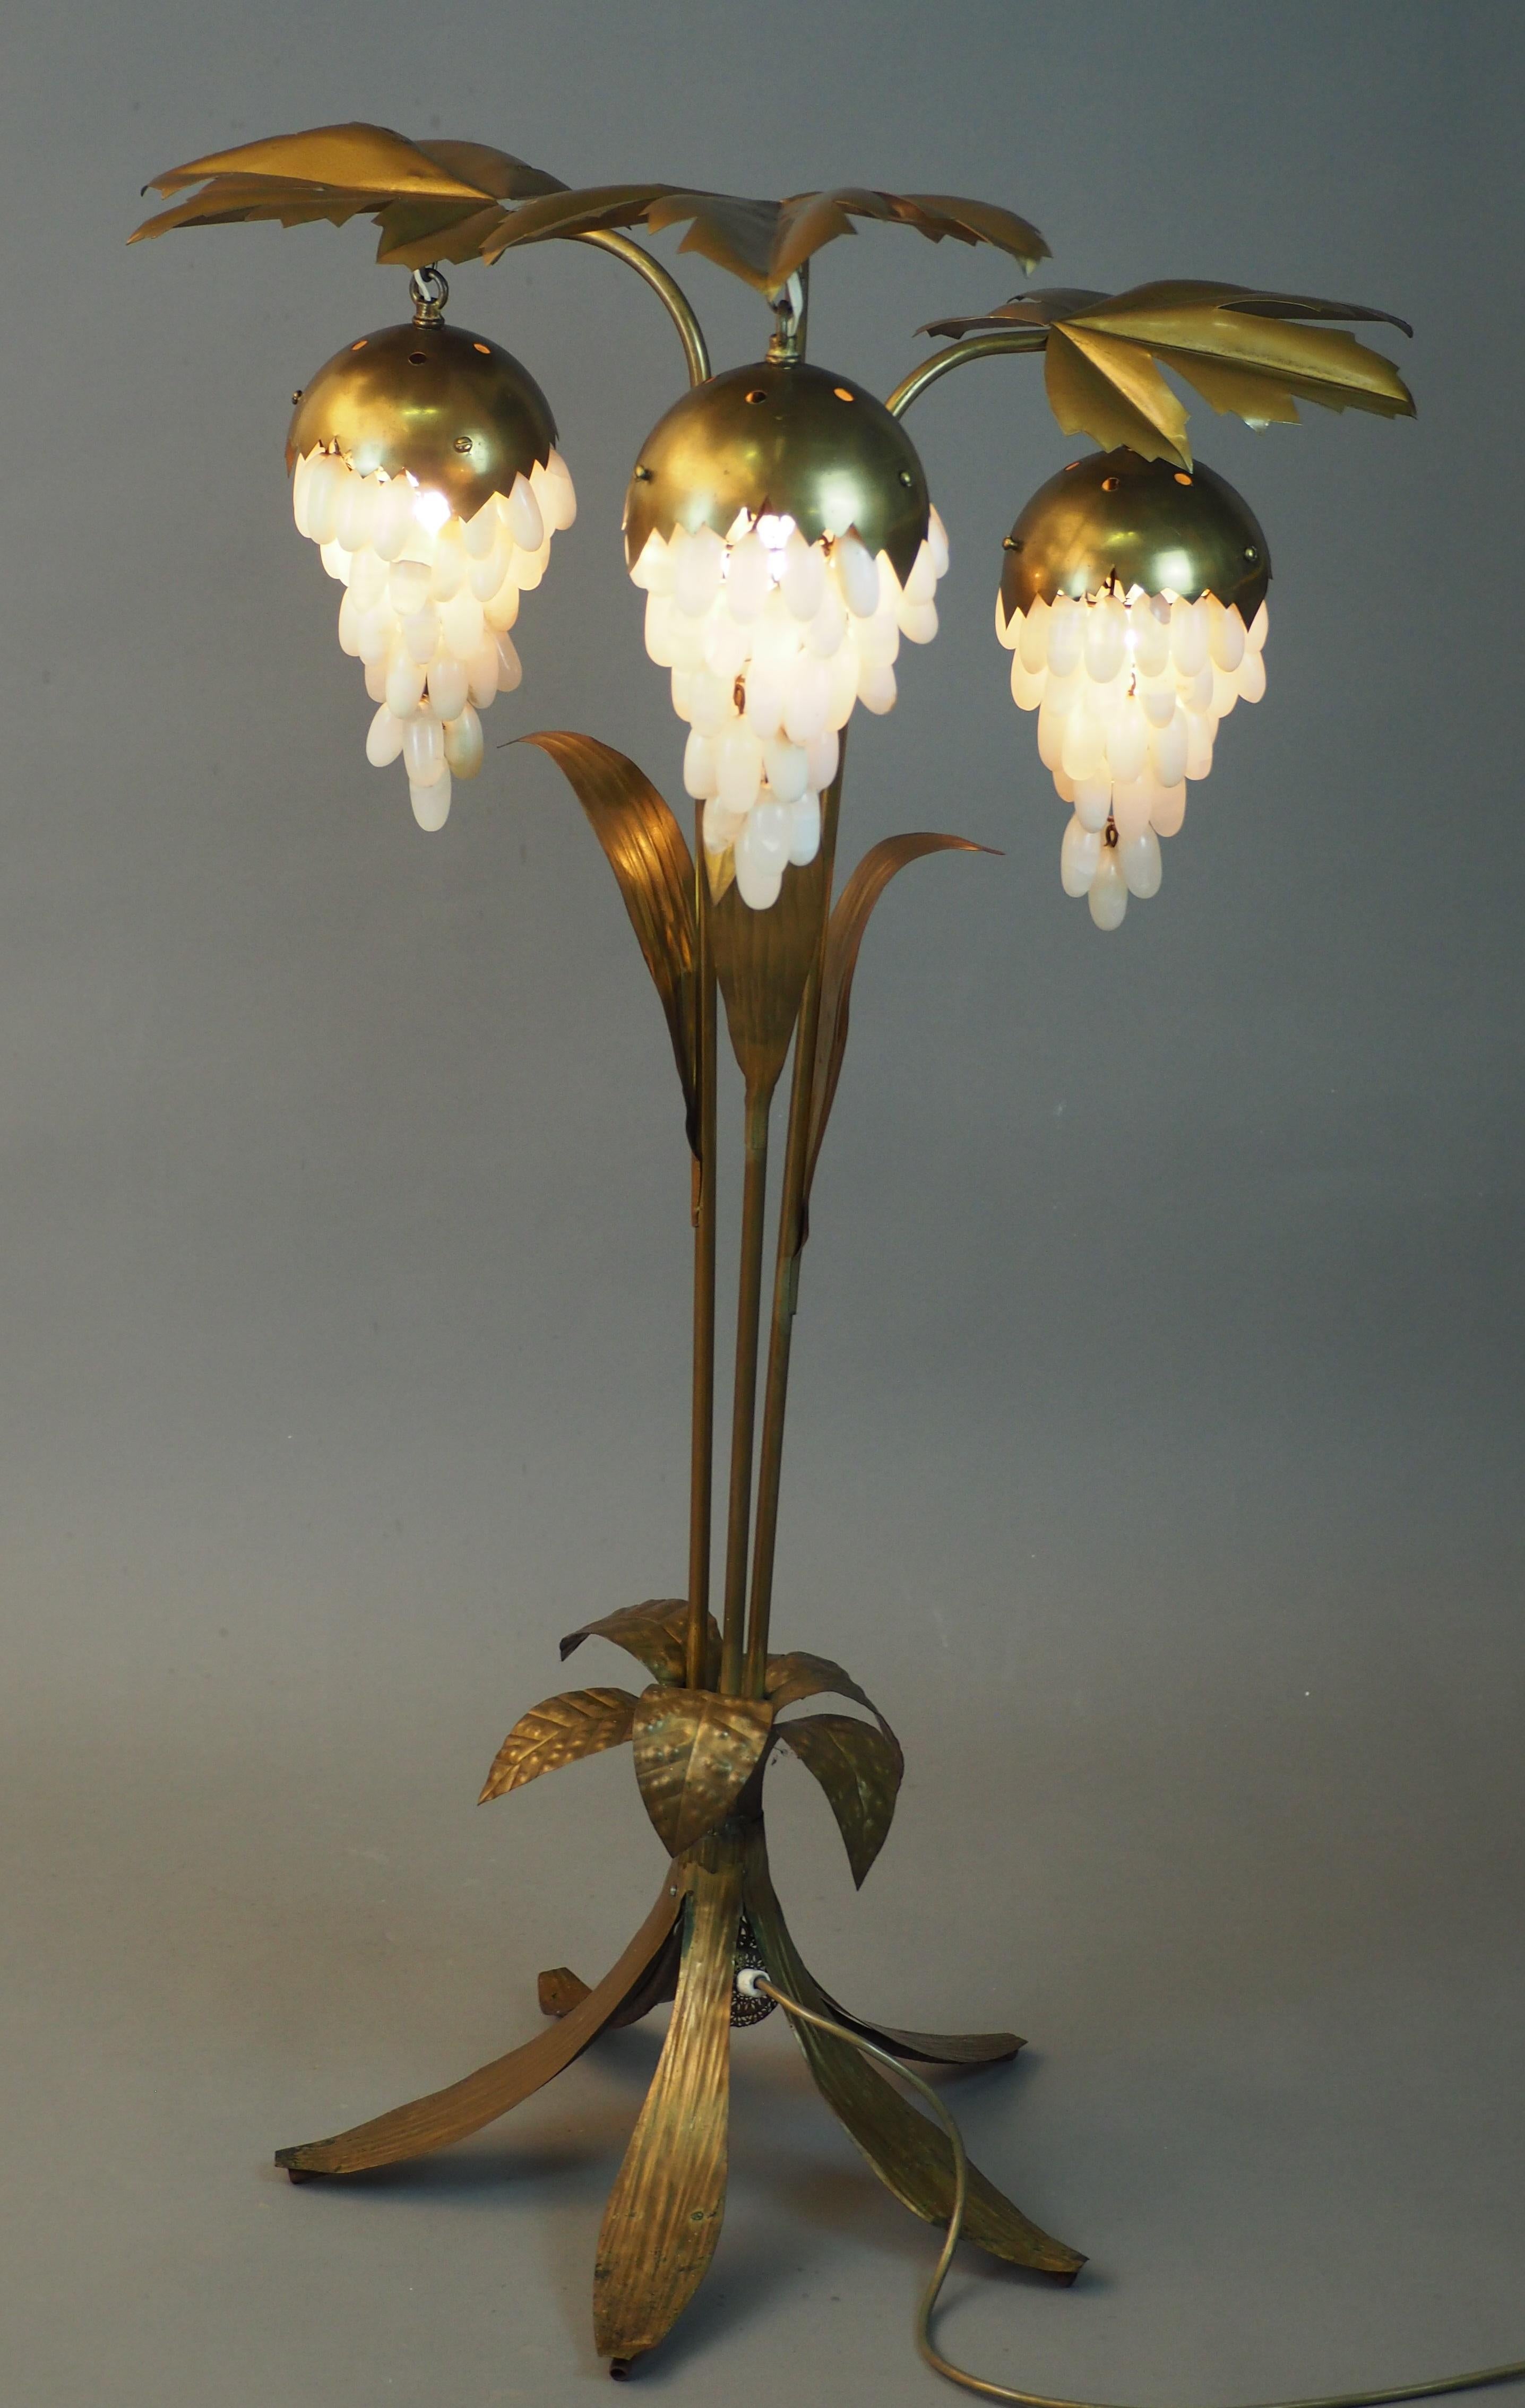 Mid-Century Brass Floor Lamp with Leafs and Alabaster Grapes, circa 1950s For Sale 3